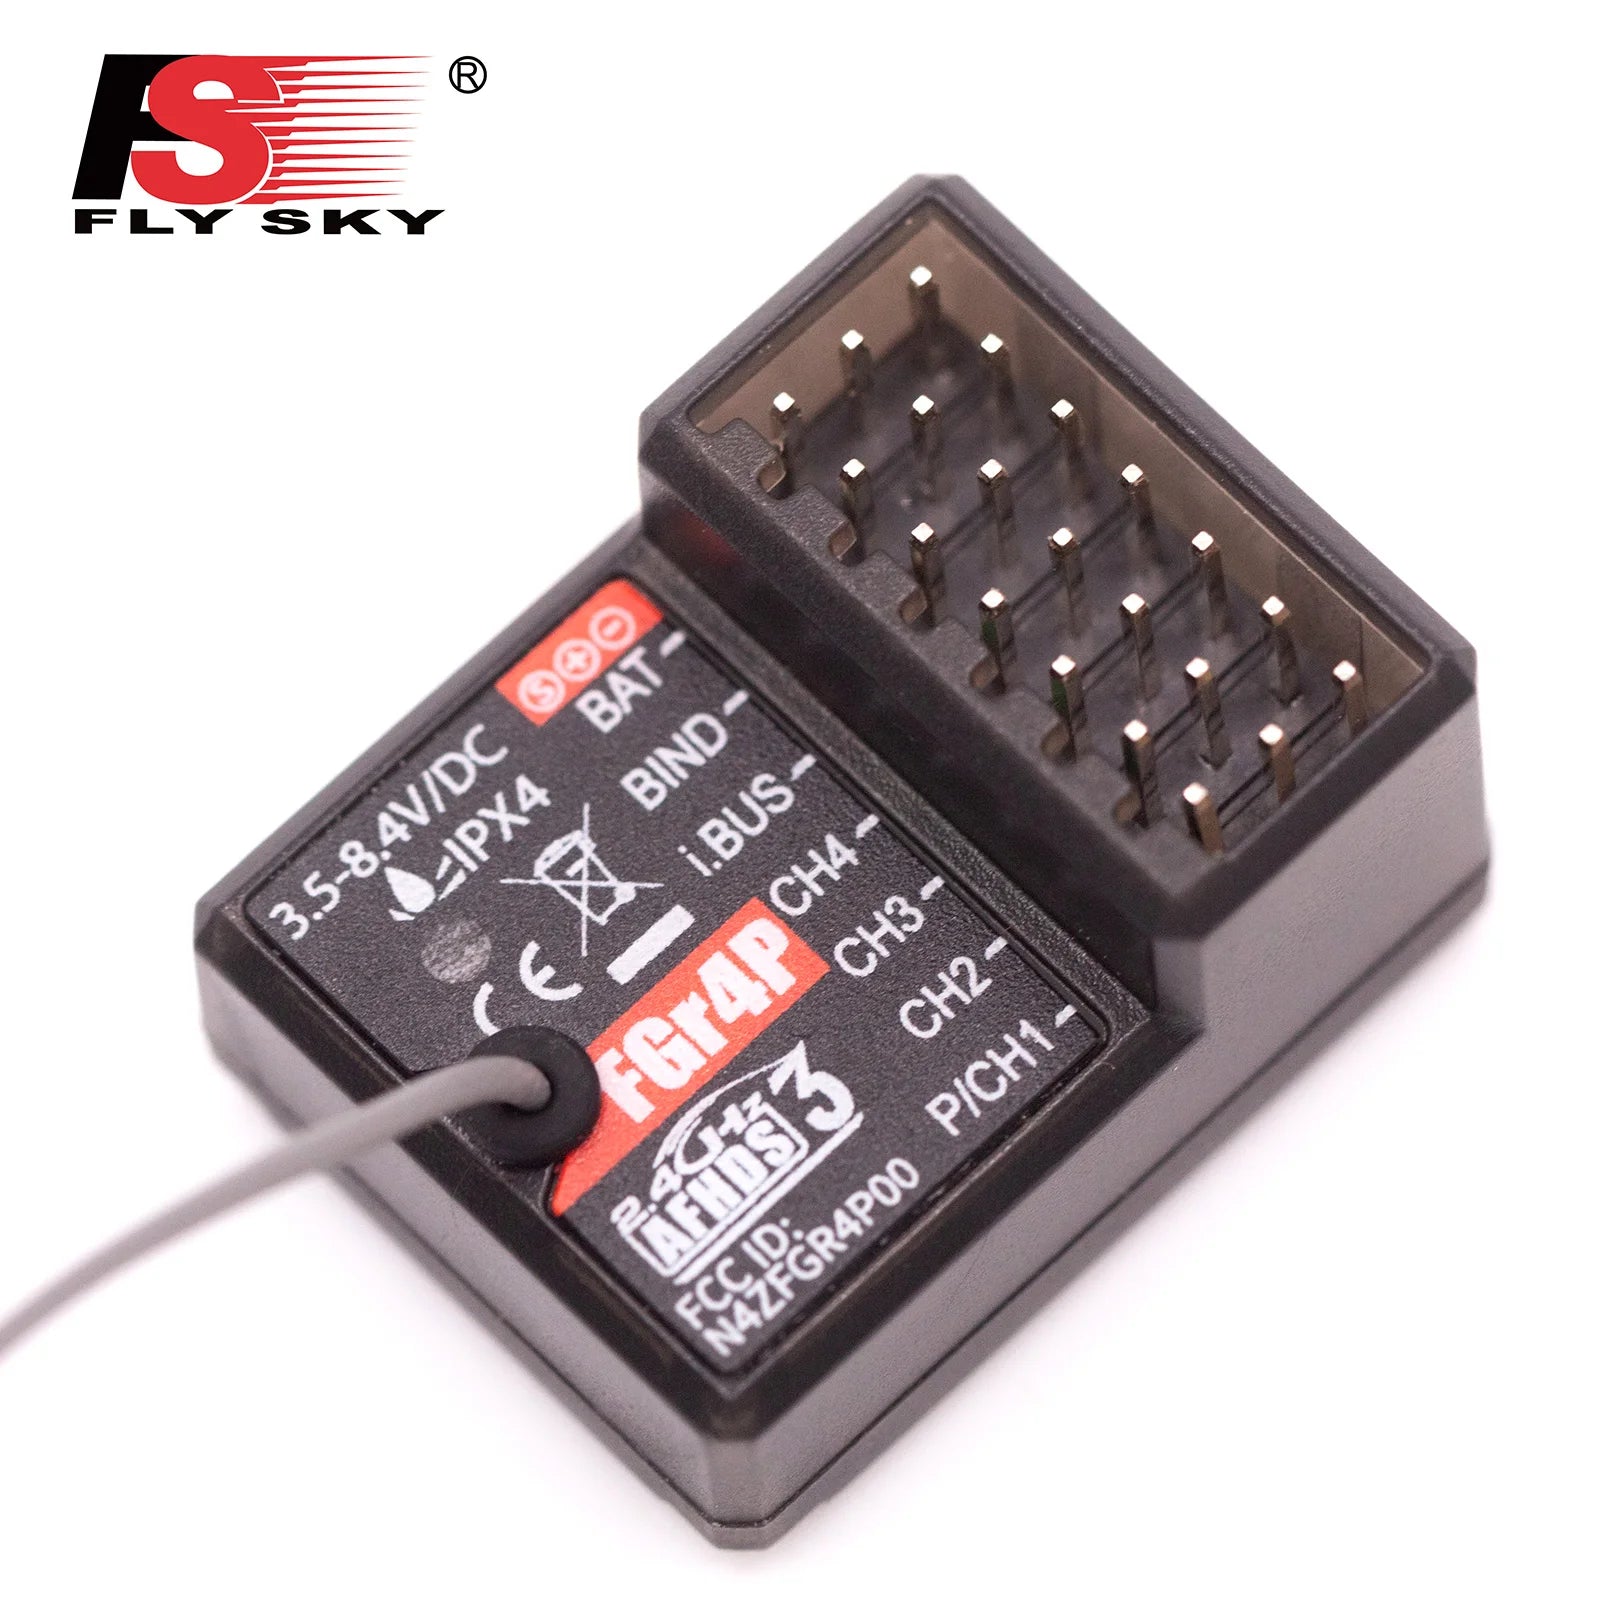 FlySky FGR4P 2.4GHz 4CH Receiver, if your purchase do not meet merchantable quality, fitness for purpose or match the description,